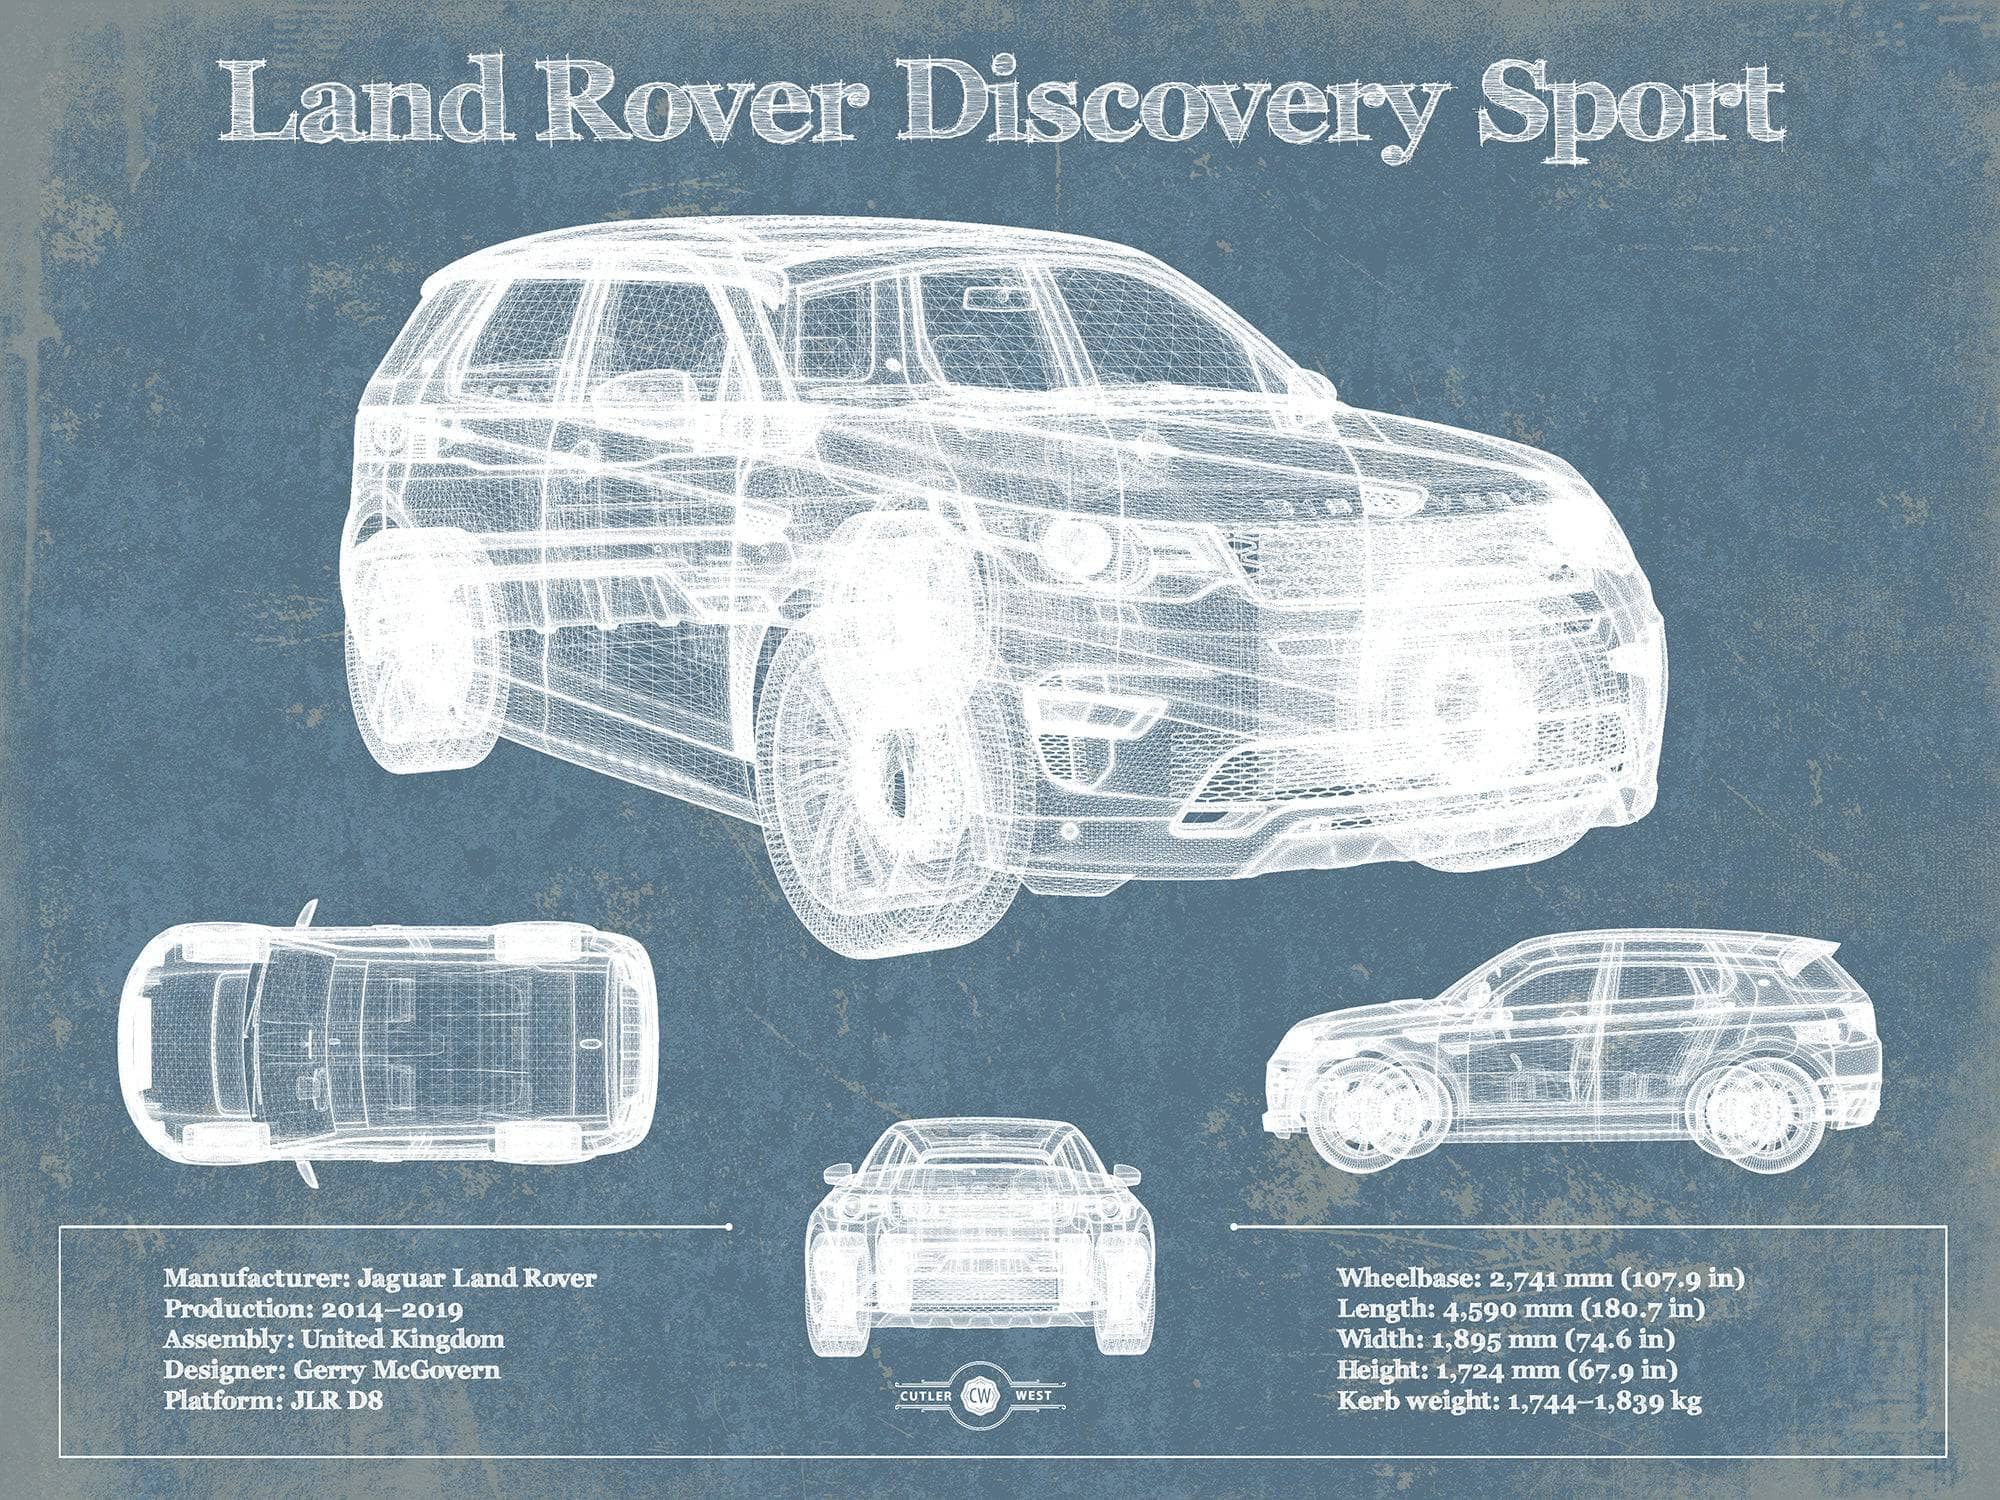 Cutler West Land Rover Collection 14" x 11" / Unframed Land Rover Discovery Sport Vintage Blueprint Auto Print 845000277_15830